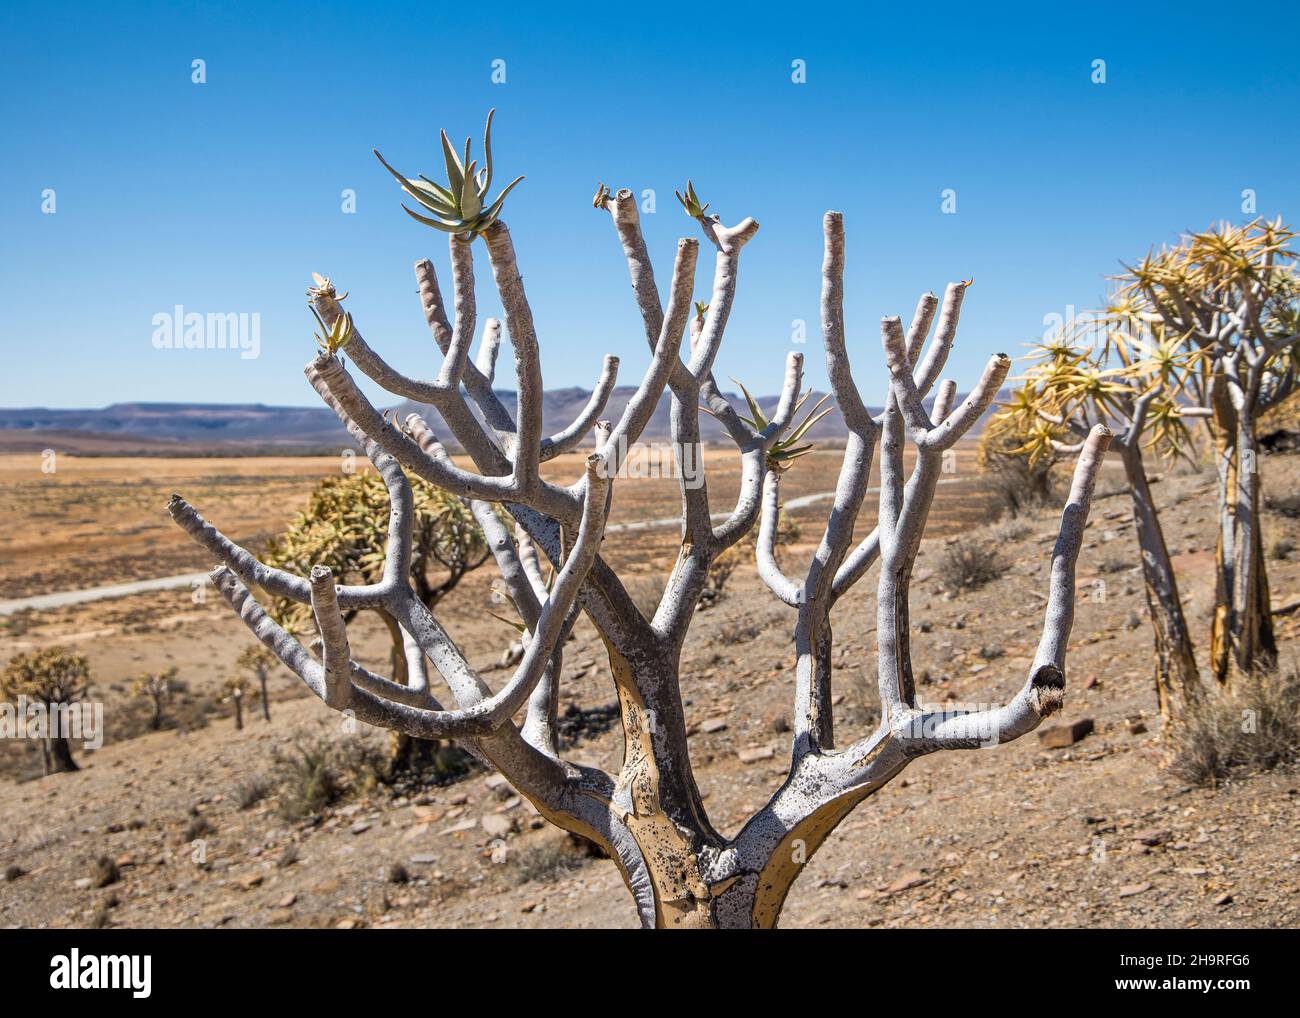 Quiver Tree forest(Aloidendron dichotomum) in the Karoo desert Stock Photo